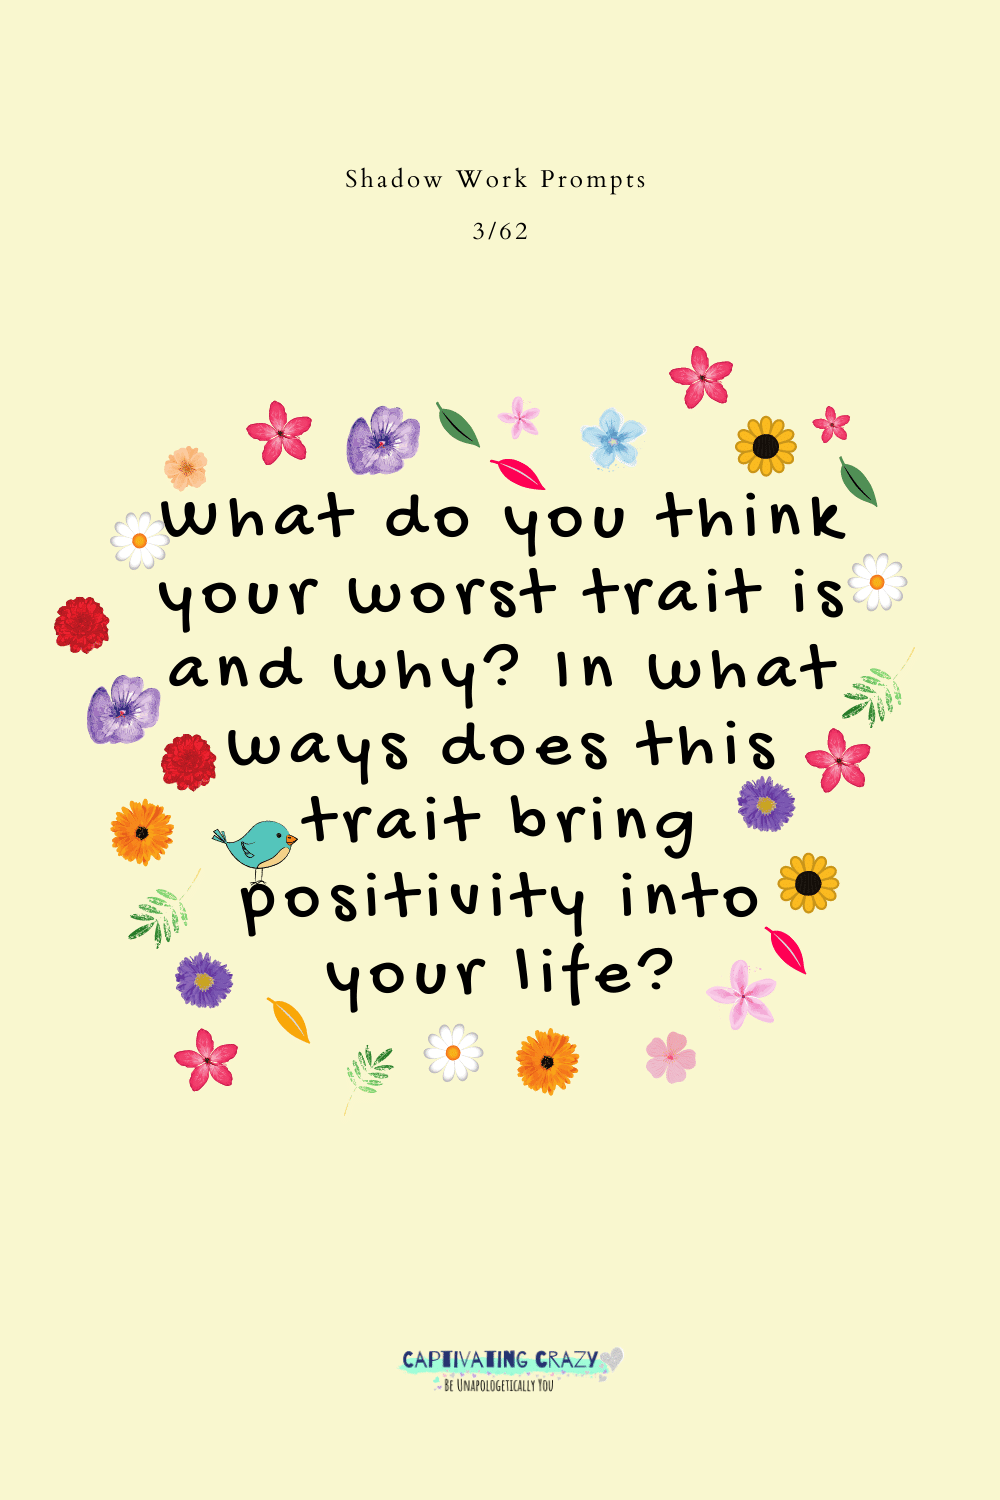 What do you think your worst trait is and why? In what ways does this trait bring positivity into your life?